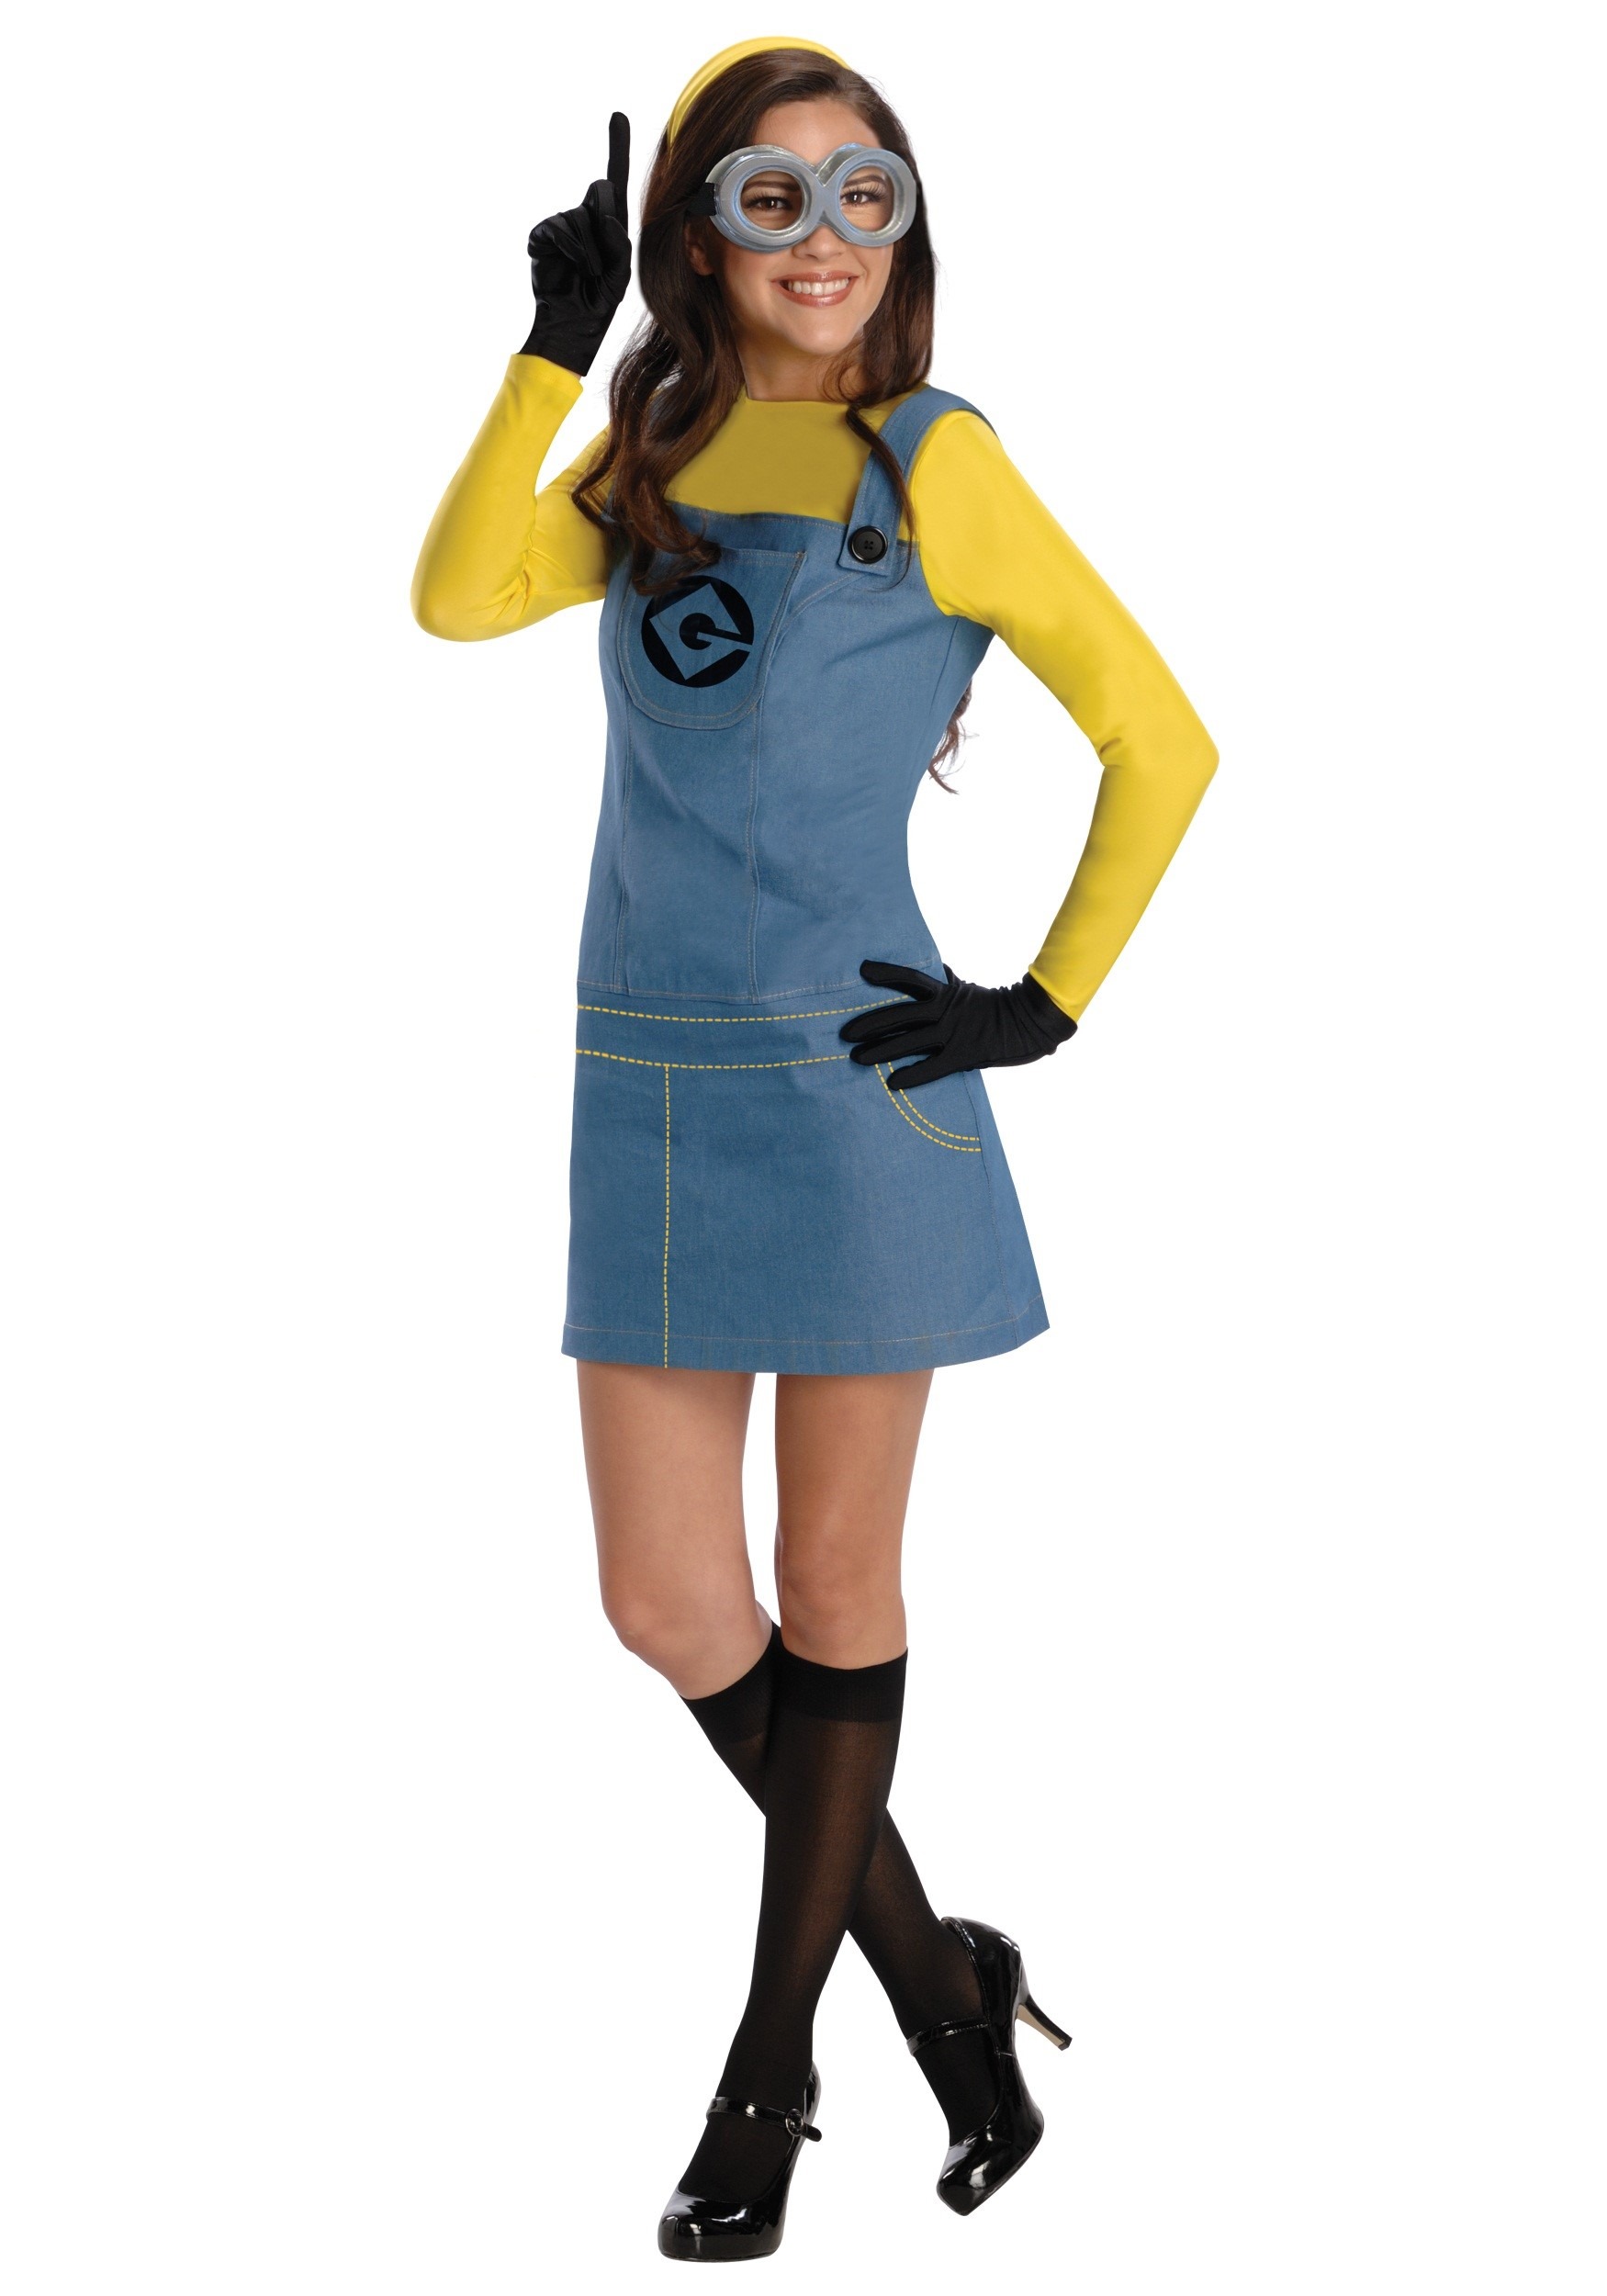 https://images.fun.com/products/17869/1-1/womens-female-minion-costume.jpg